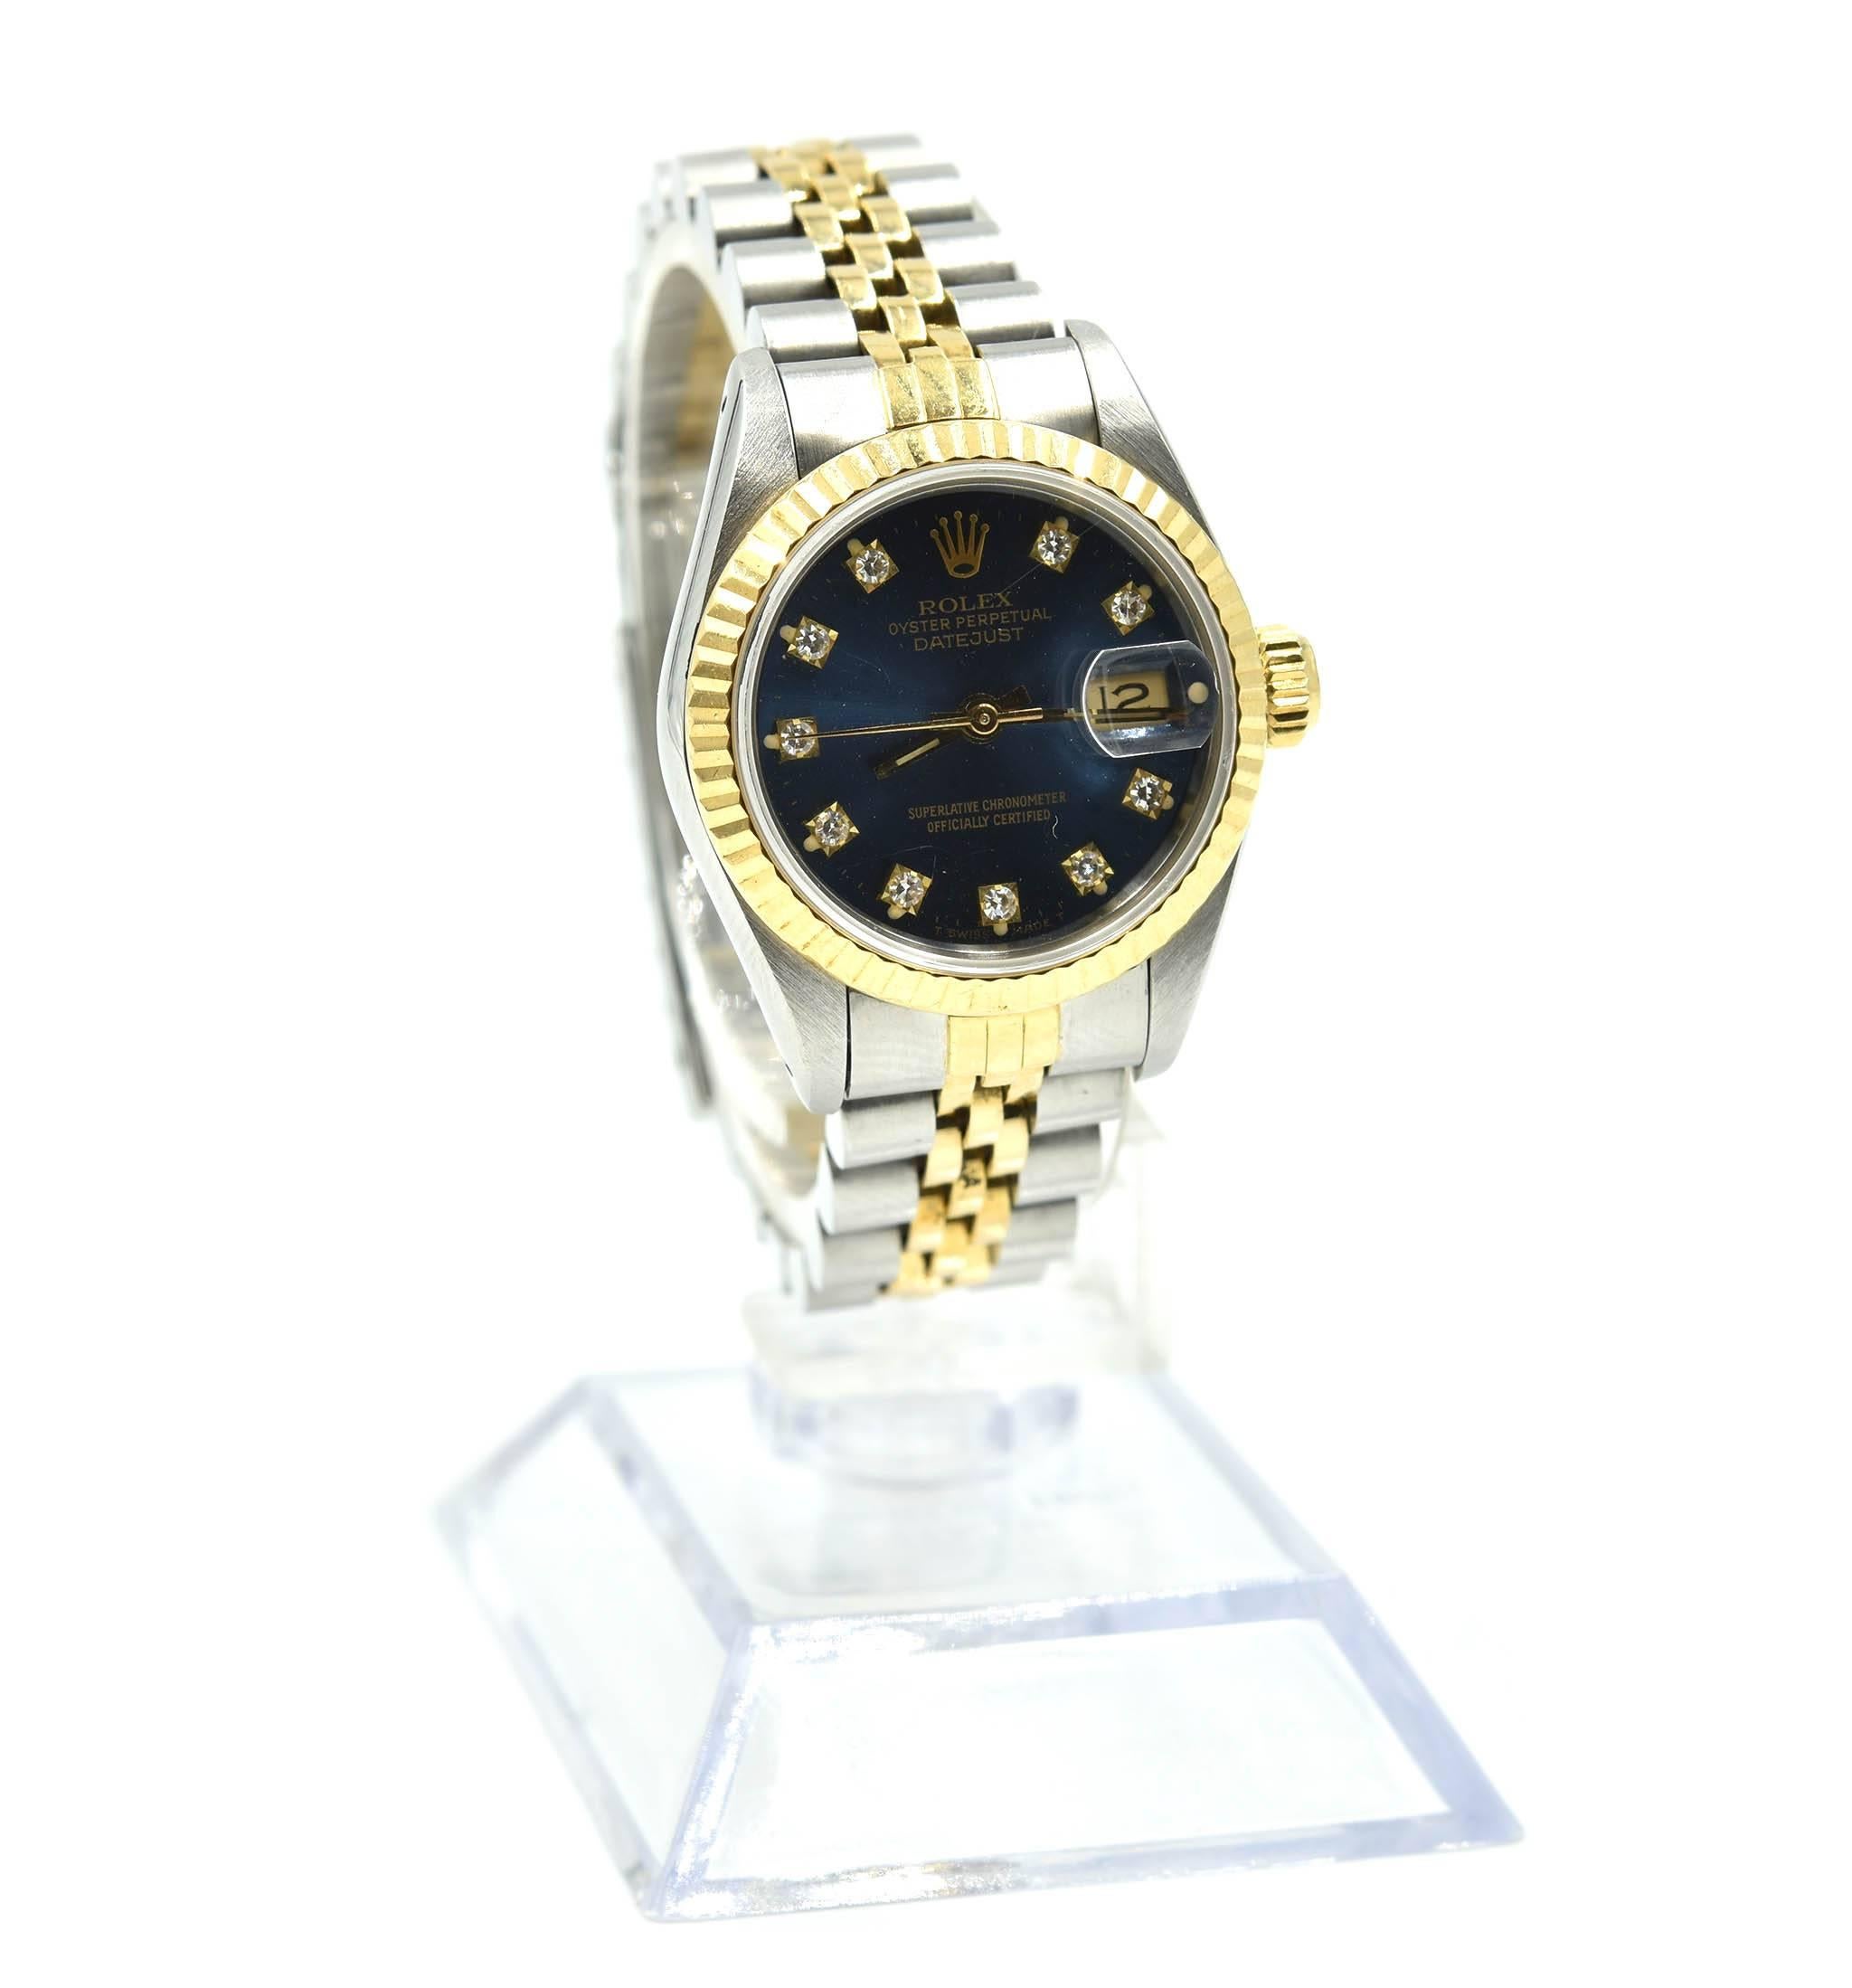 Movement: automatic
Function: hours, minutes, sweep seconds, date
Case: round 26mm stainless steel and 18k yellow gold case, 18k yellow gold fluted bezel, sapphire protective crystal, screw-down crown, water resistant to 100 meters 
Band: 18k yellow